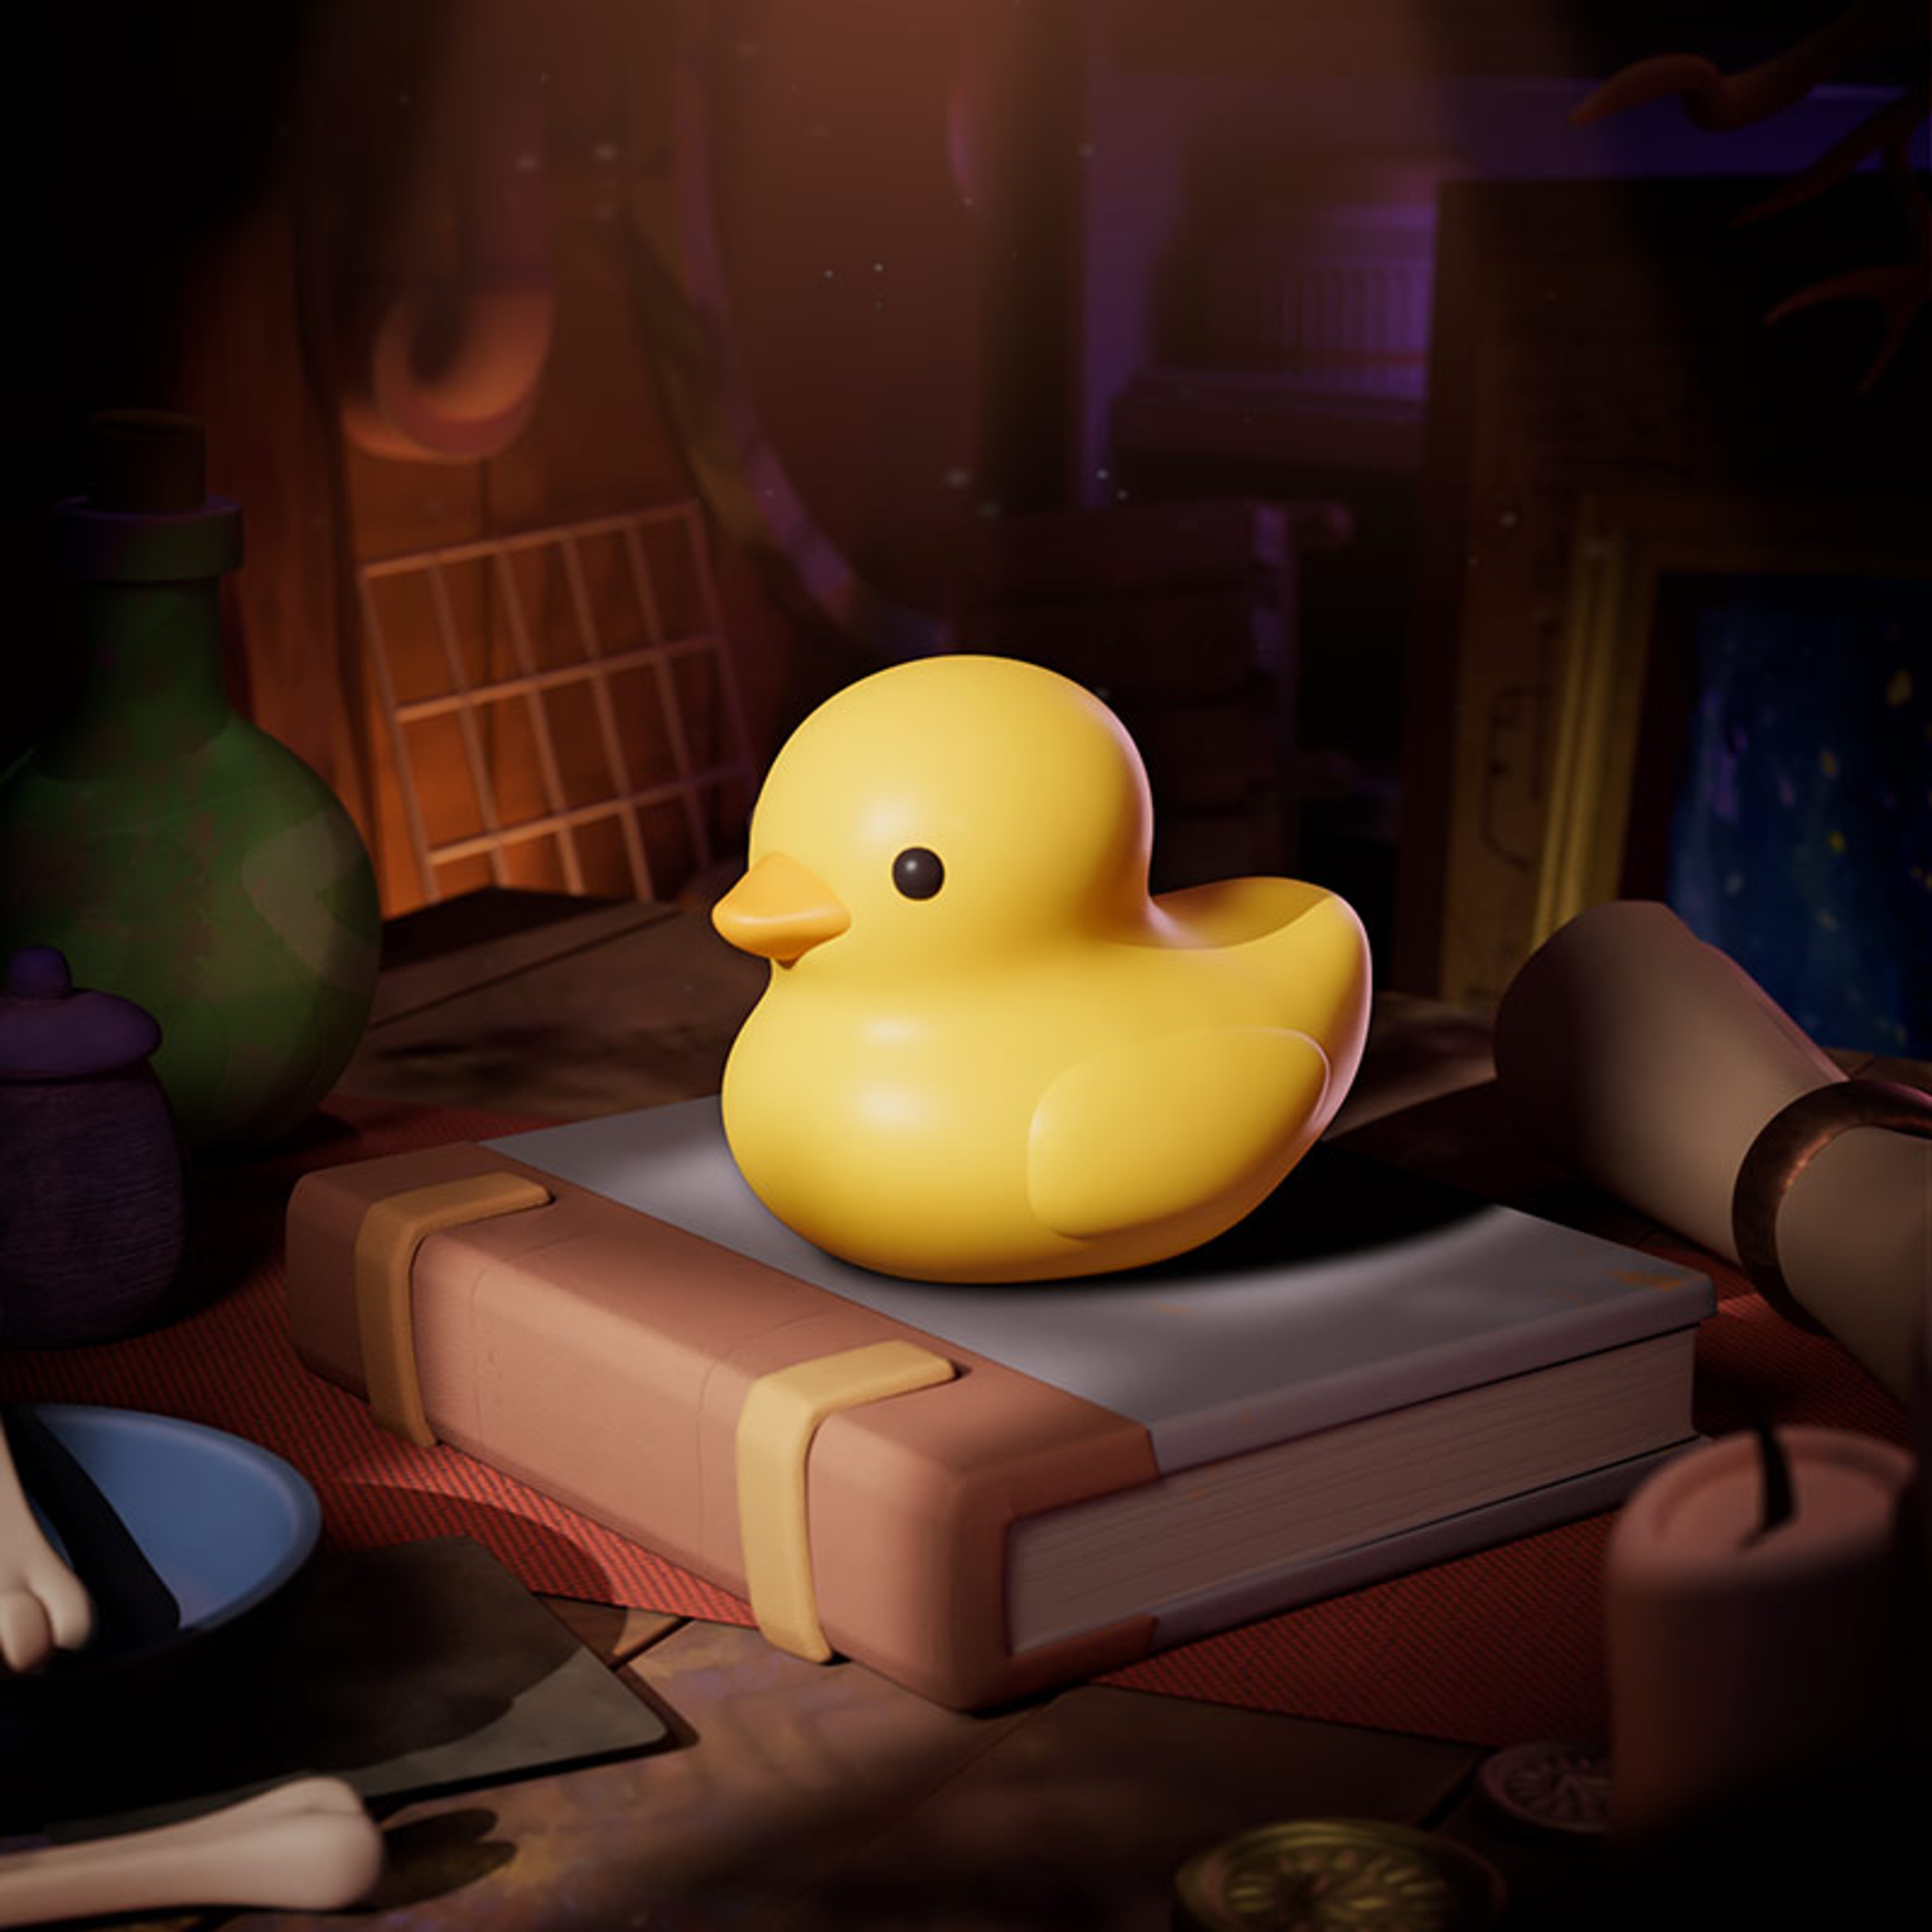 Yellow Rubber Duck